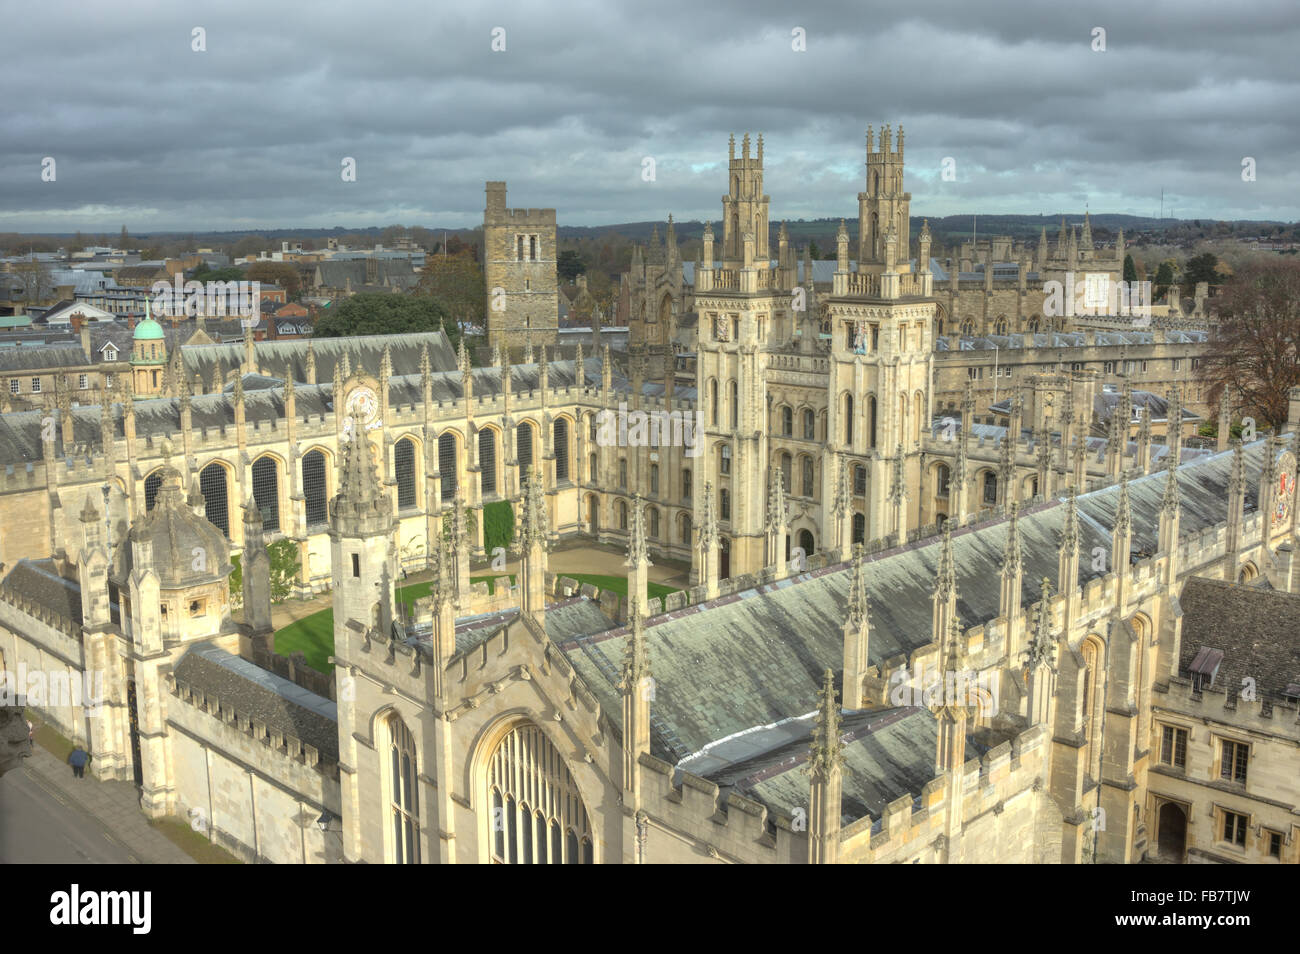 All Souls College, university of oxford Stock Photo